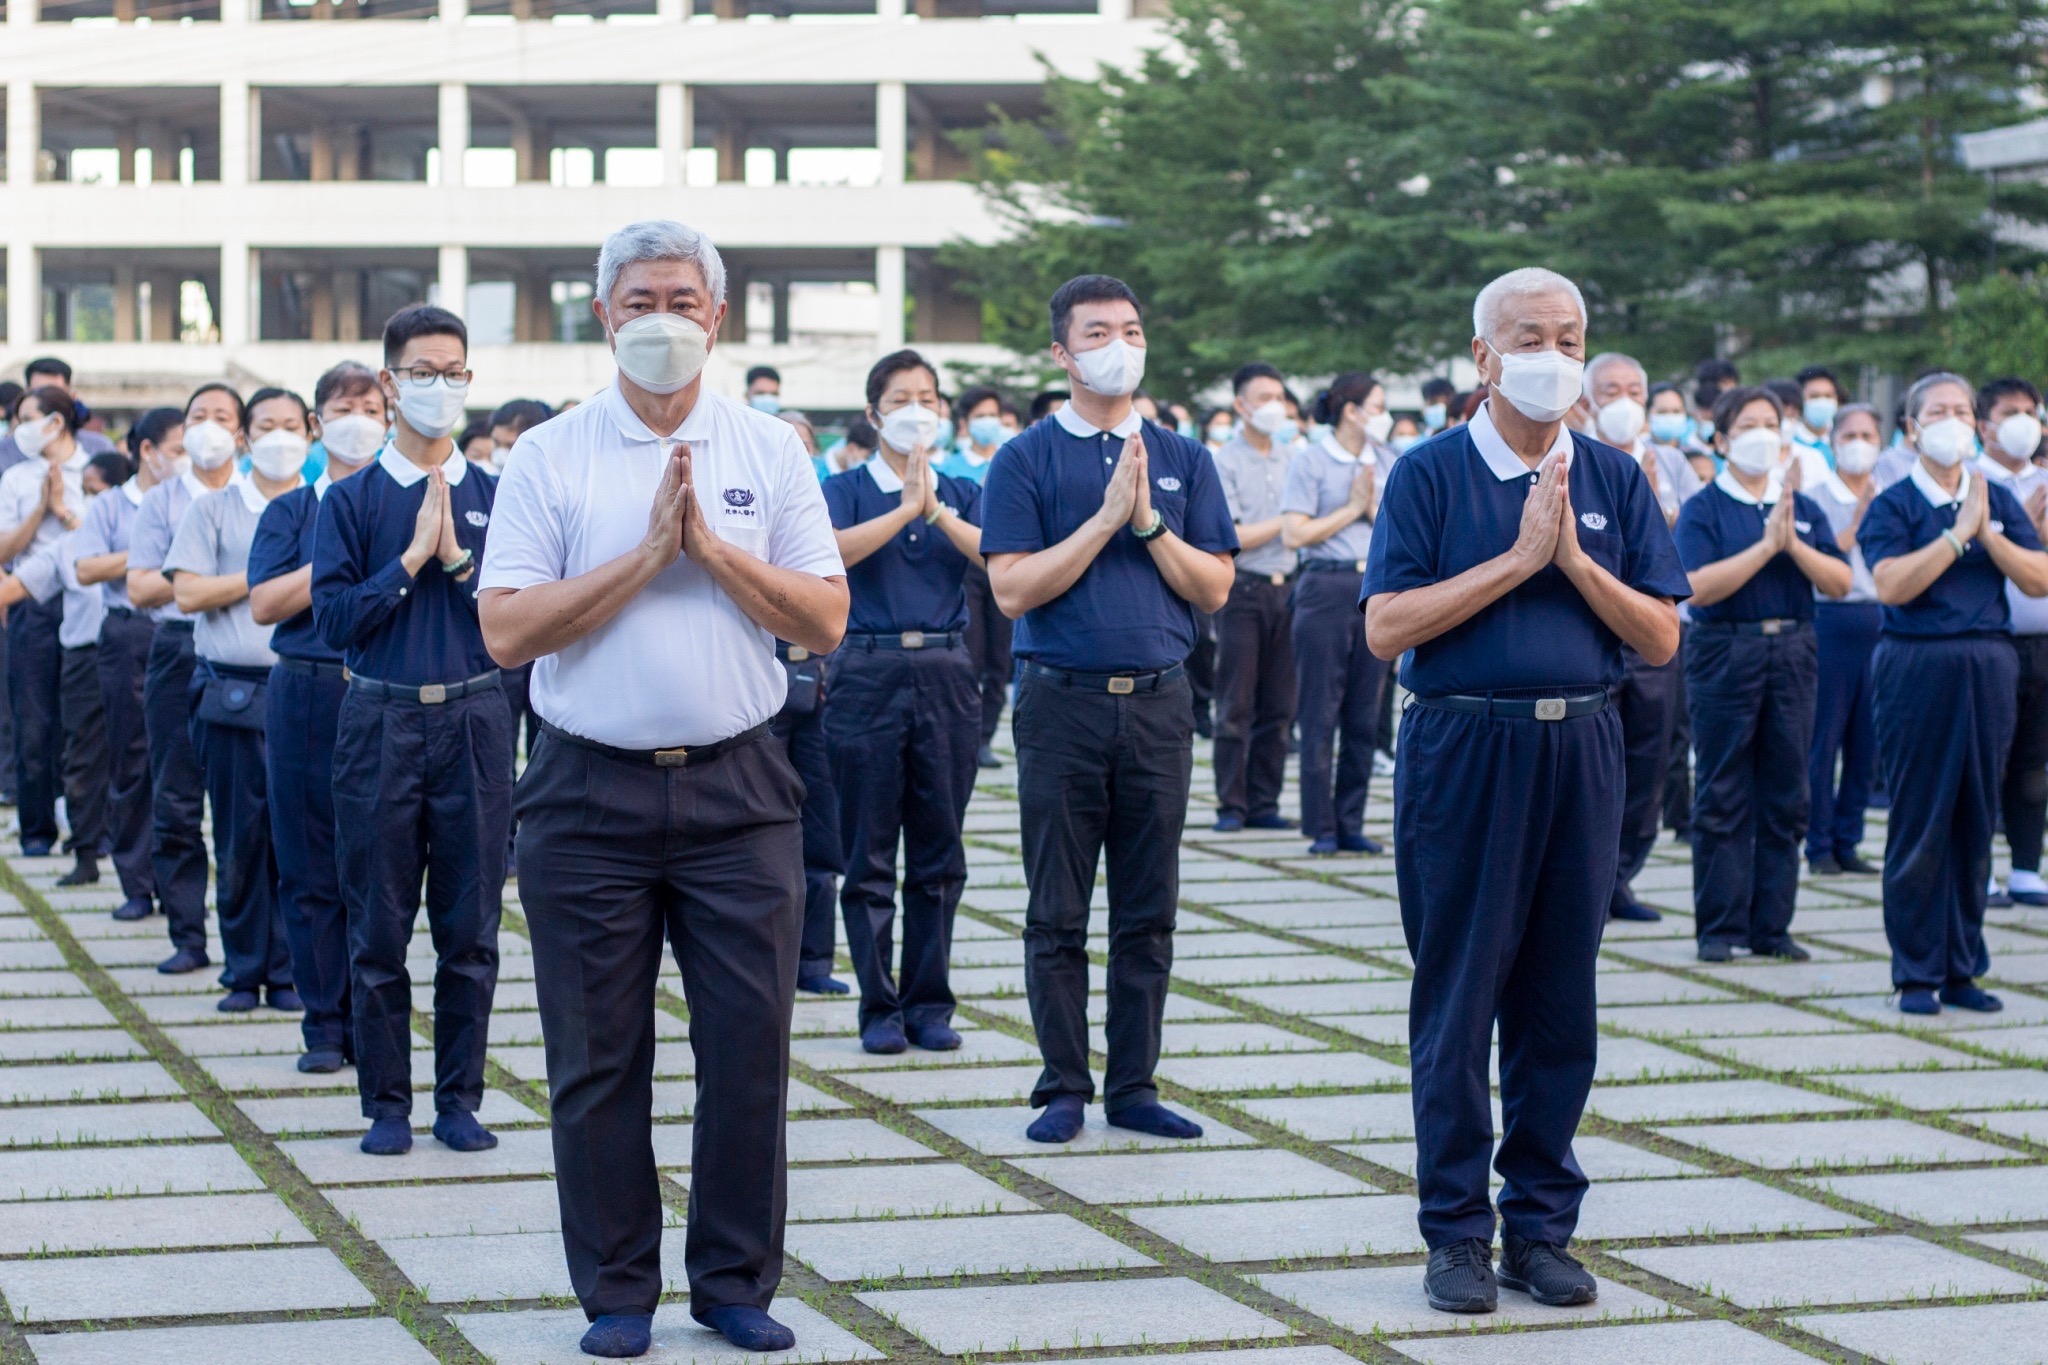 TIMA founding member Dr. Jo Qua (in white) stands alongside Tzu Chi Philippines CEO Henry Yuñez in the 3 steps and 1 bow ceremony.【Photo by Matt Serrano】